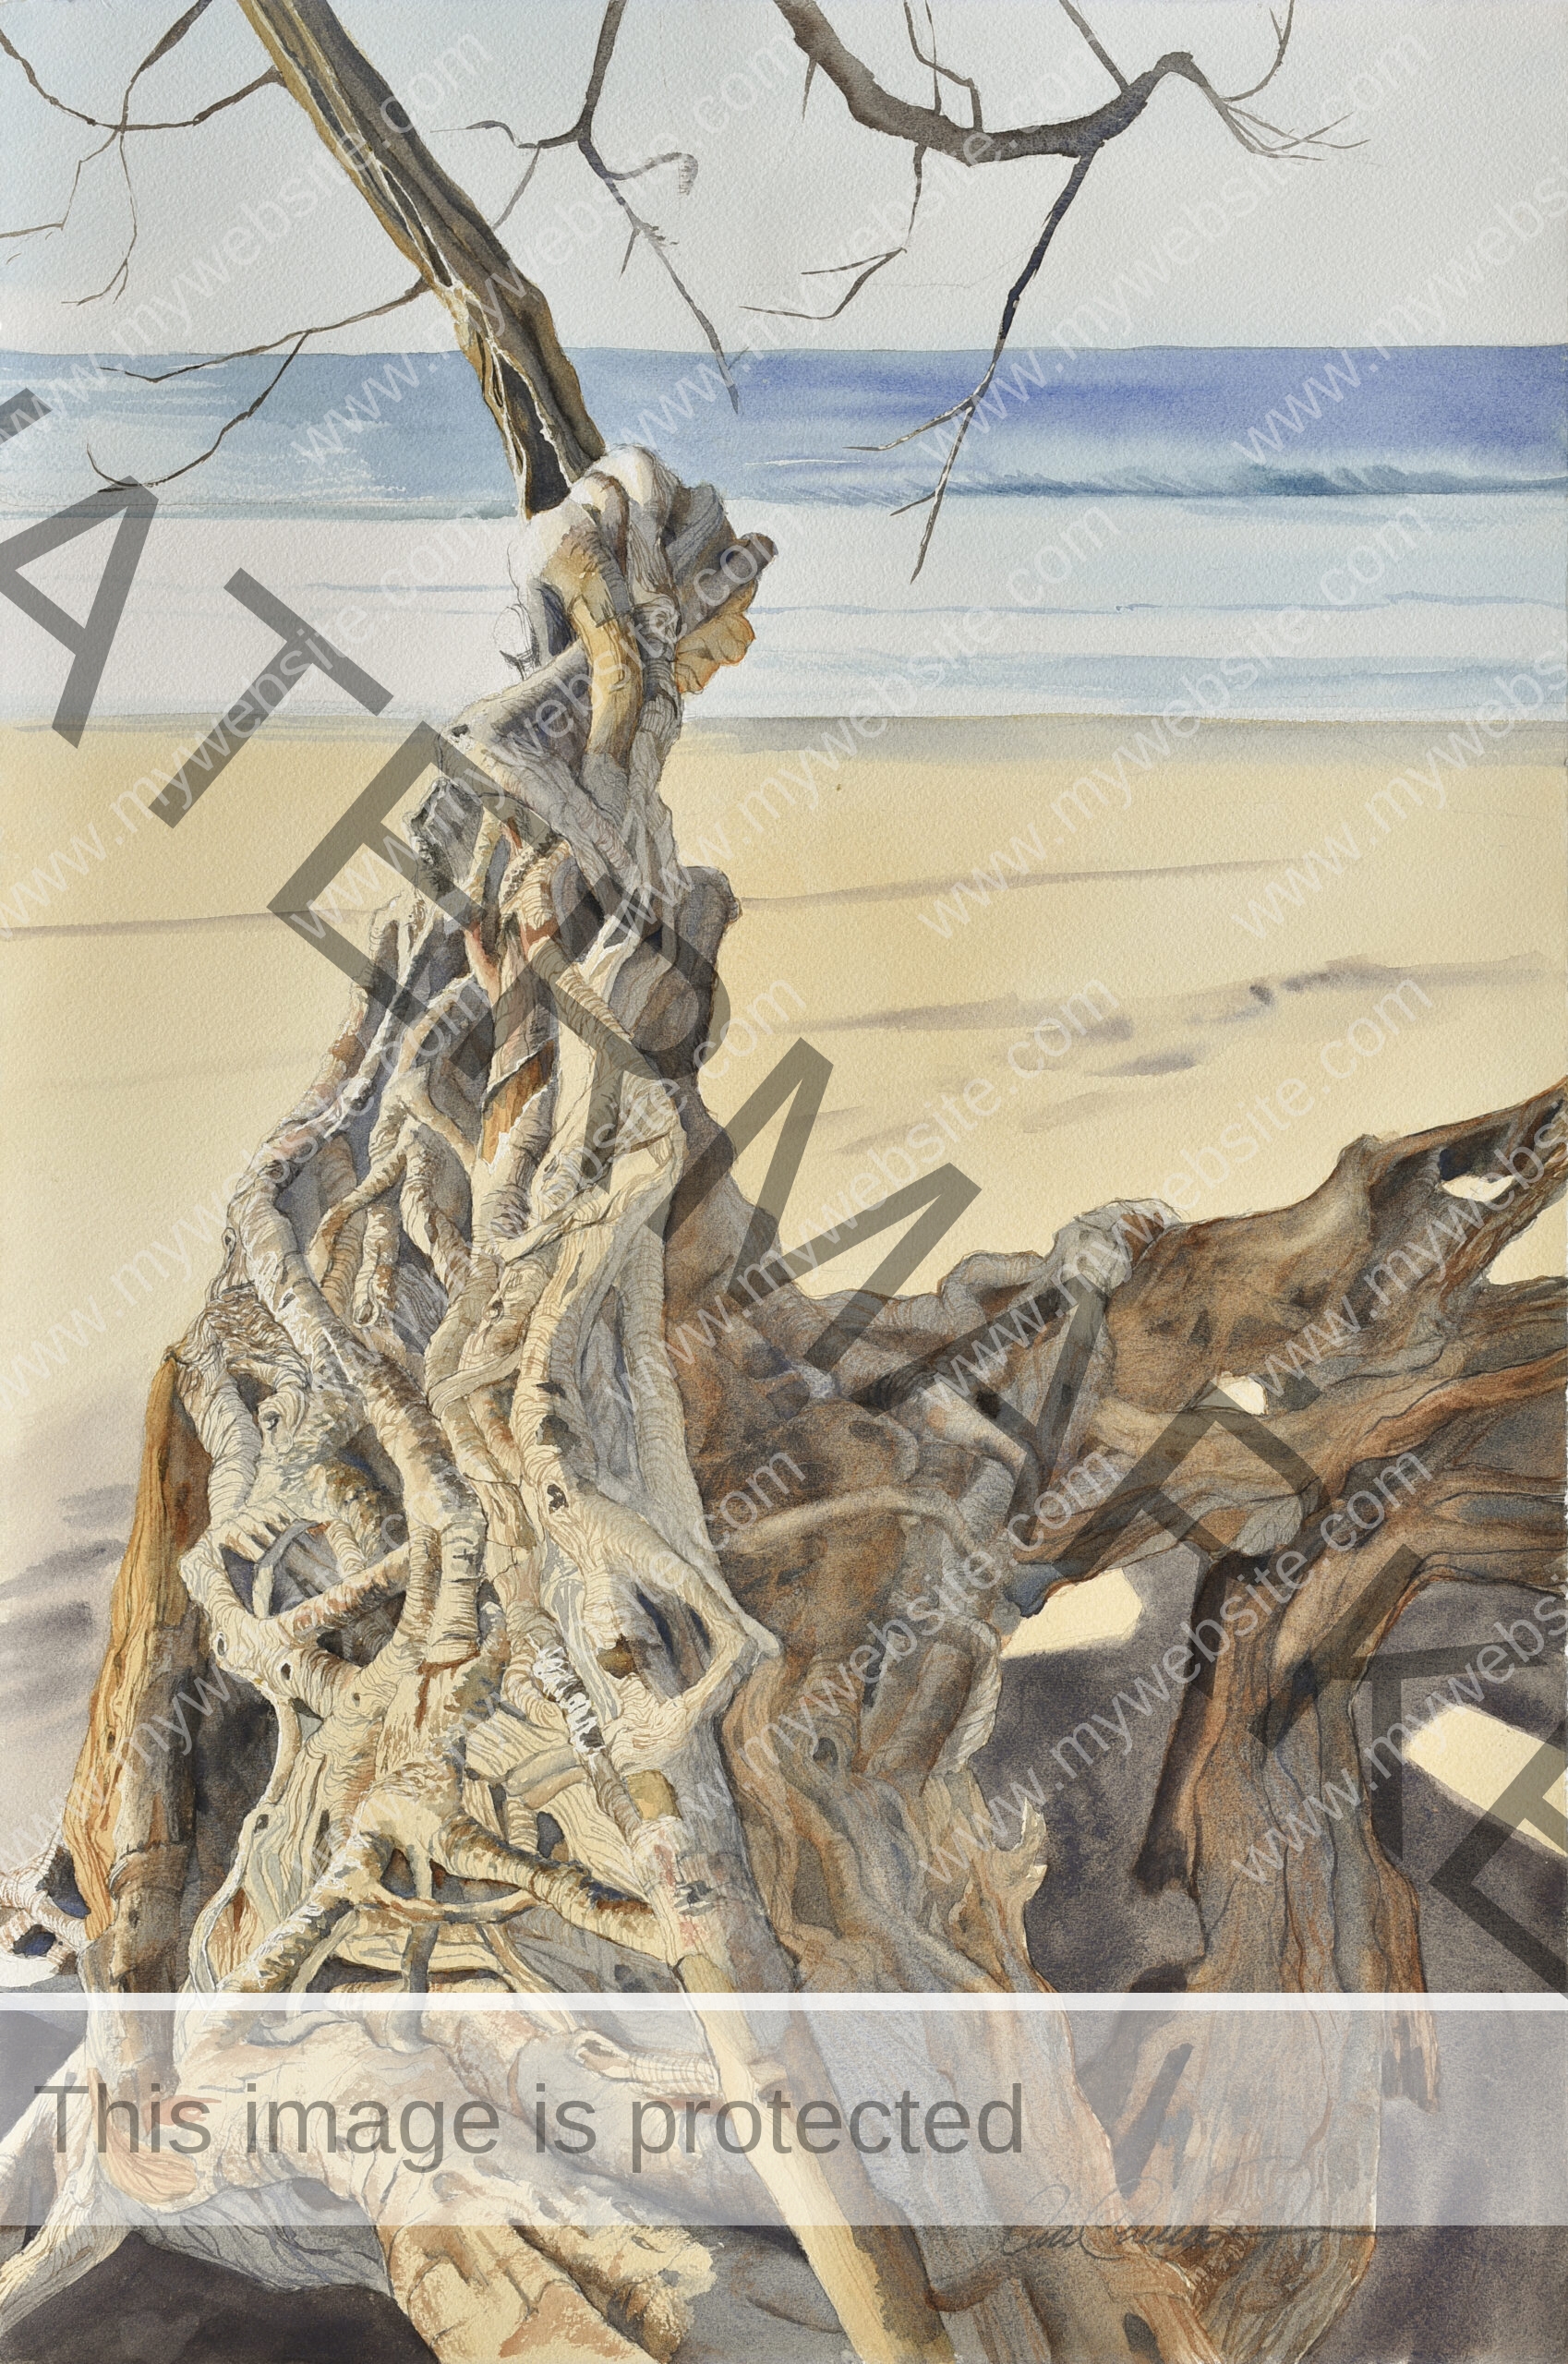 Costa Rica Driftwood painting. Watercolour of driftwood on a beach, in front of the ocean, Ana Elena Fernández.